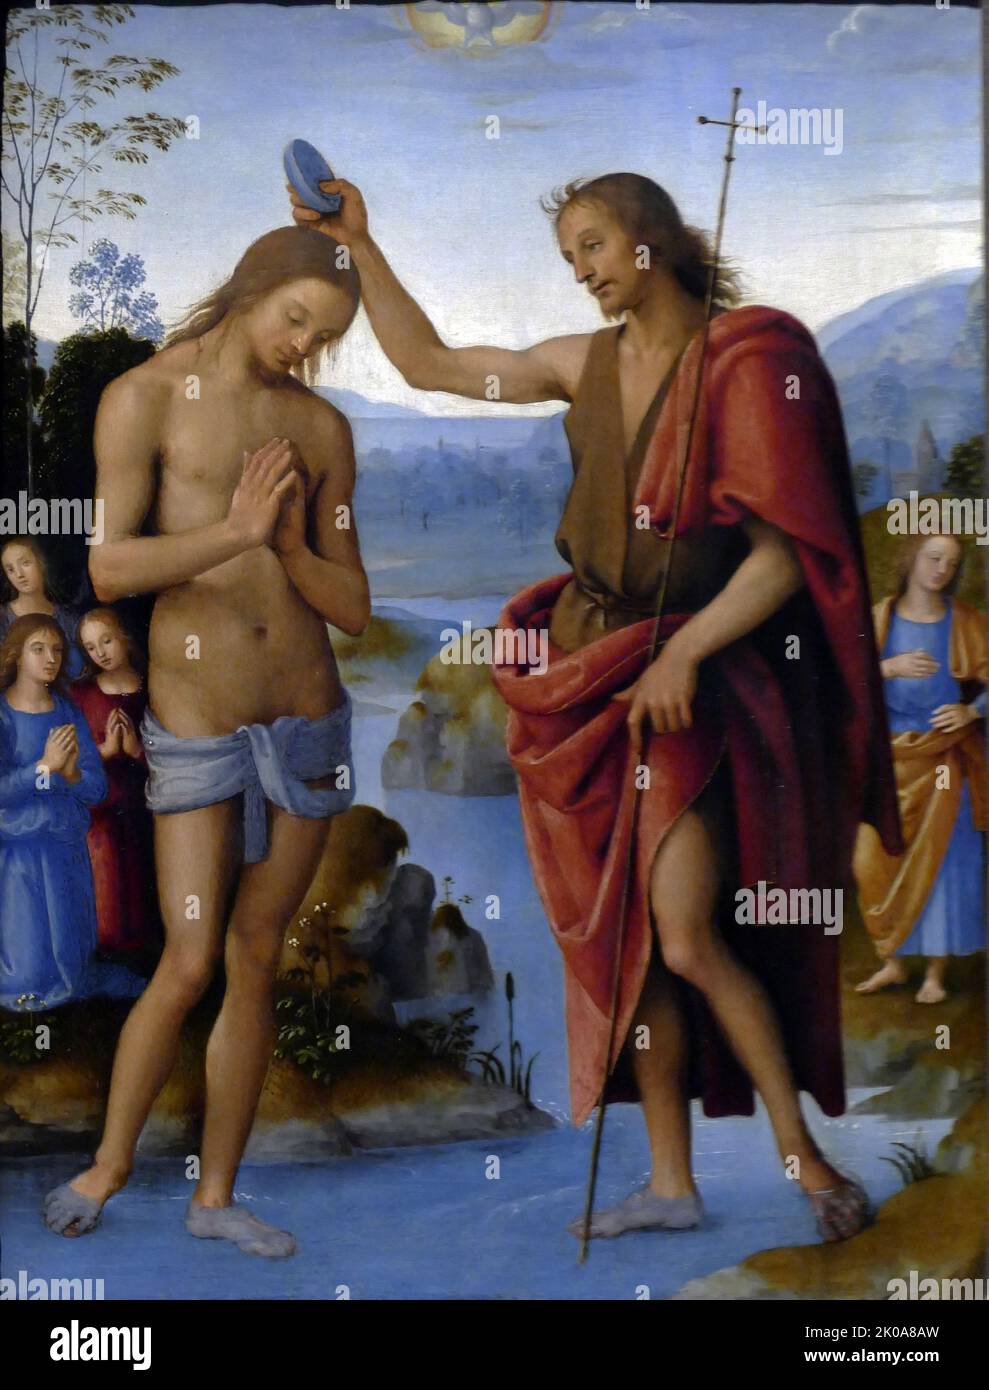 Baptism of Christ; 1498/1500 painting by Pietro Perugino (located in Vienna, Austria). Pietro Perugino (1446/1452 - 1523), was an Italian Renaissance painter of the Umbrian school, who developed some of the qualities that found classic expression in the High Renaissance. Stock Photo